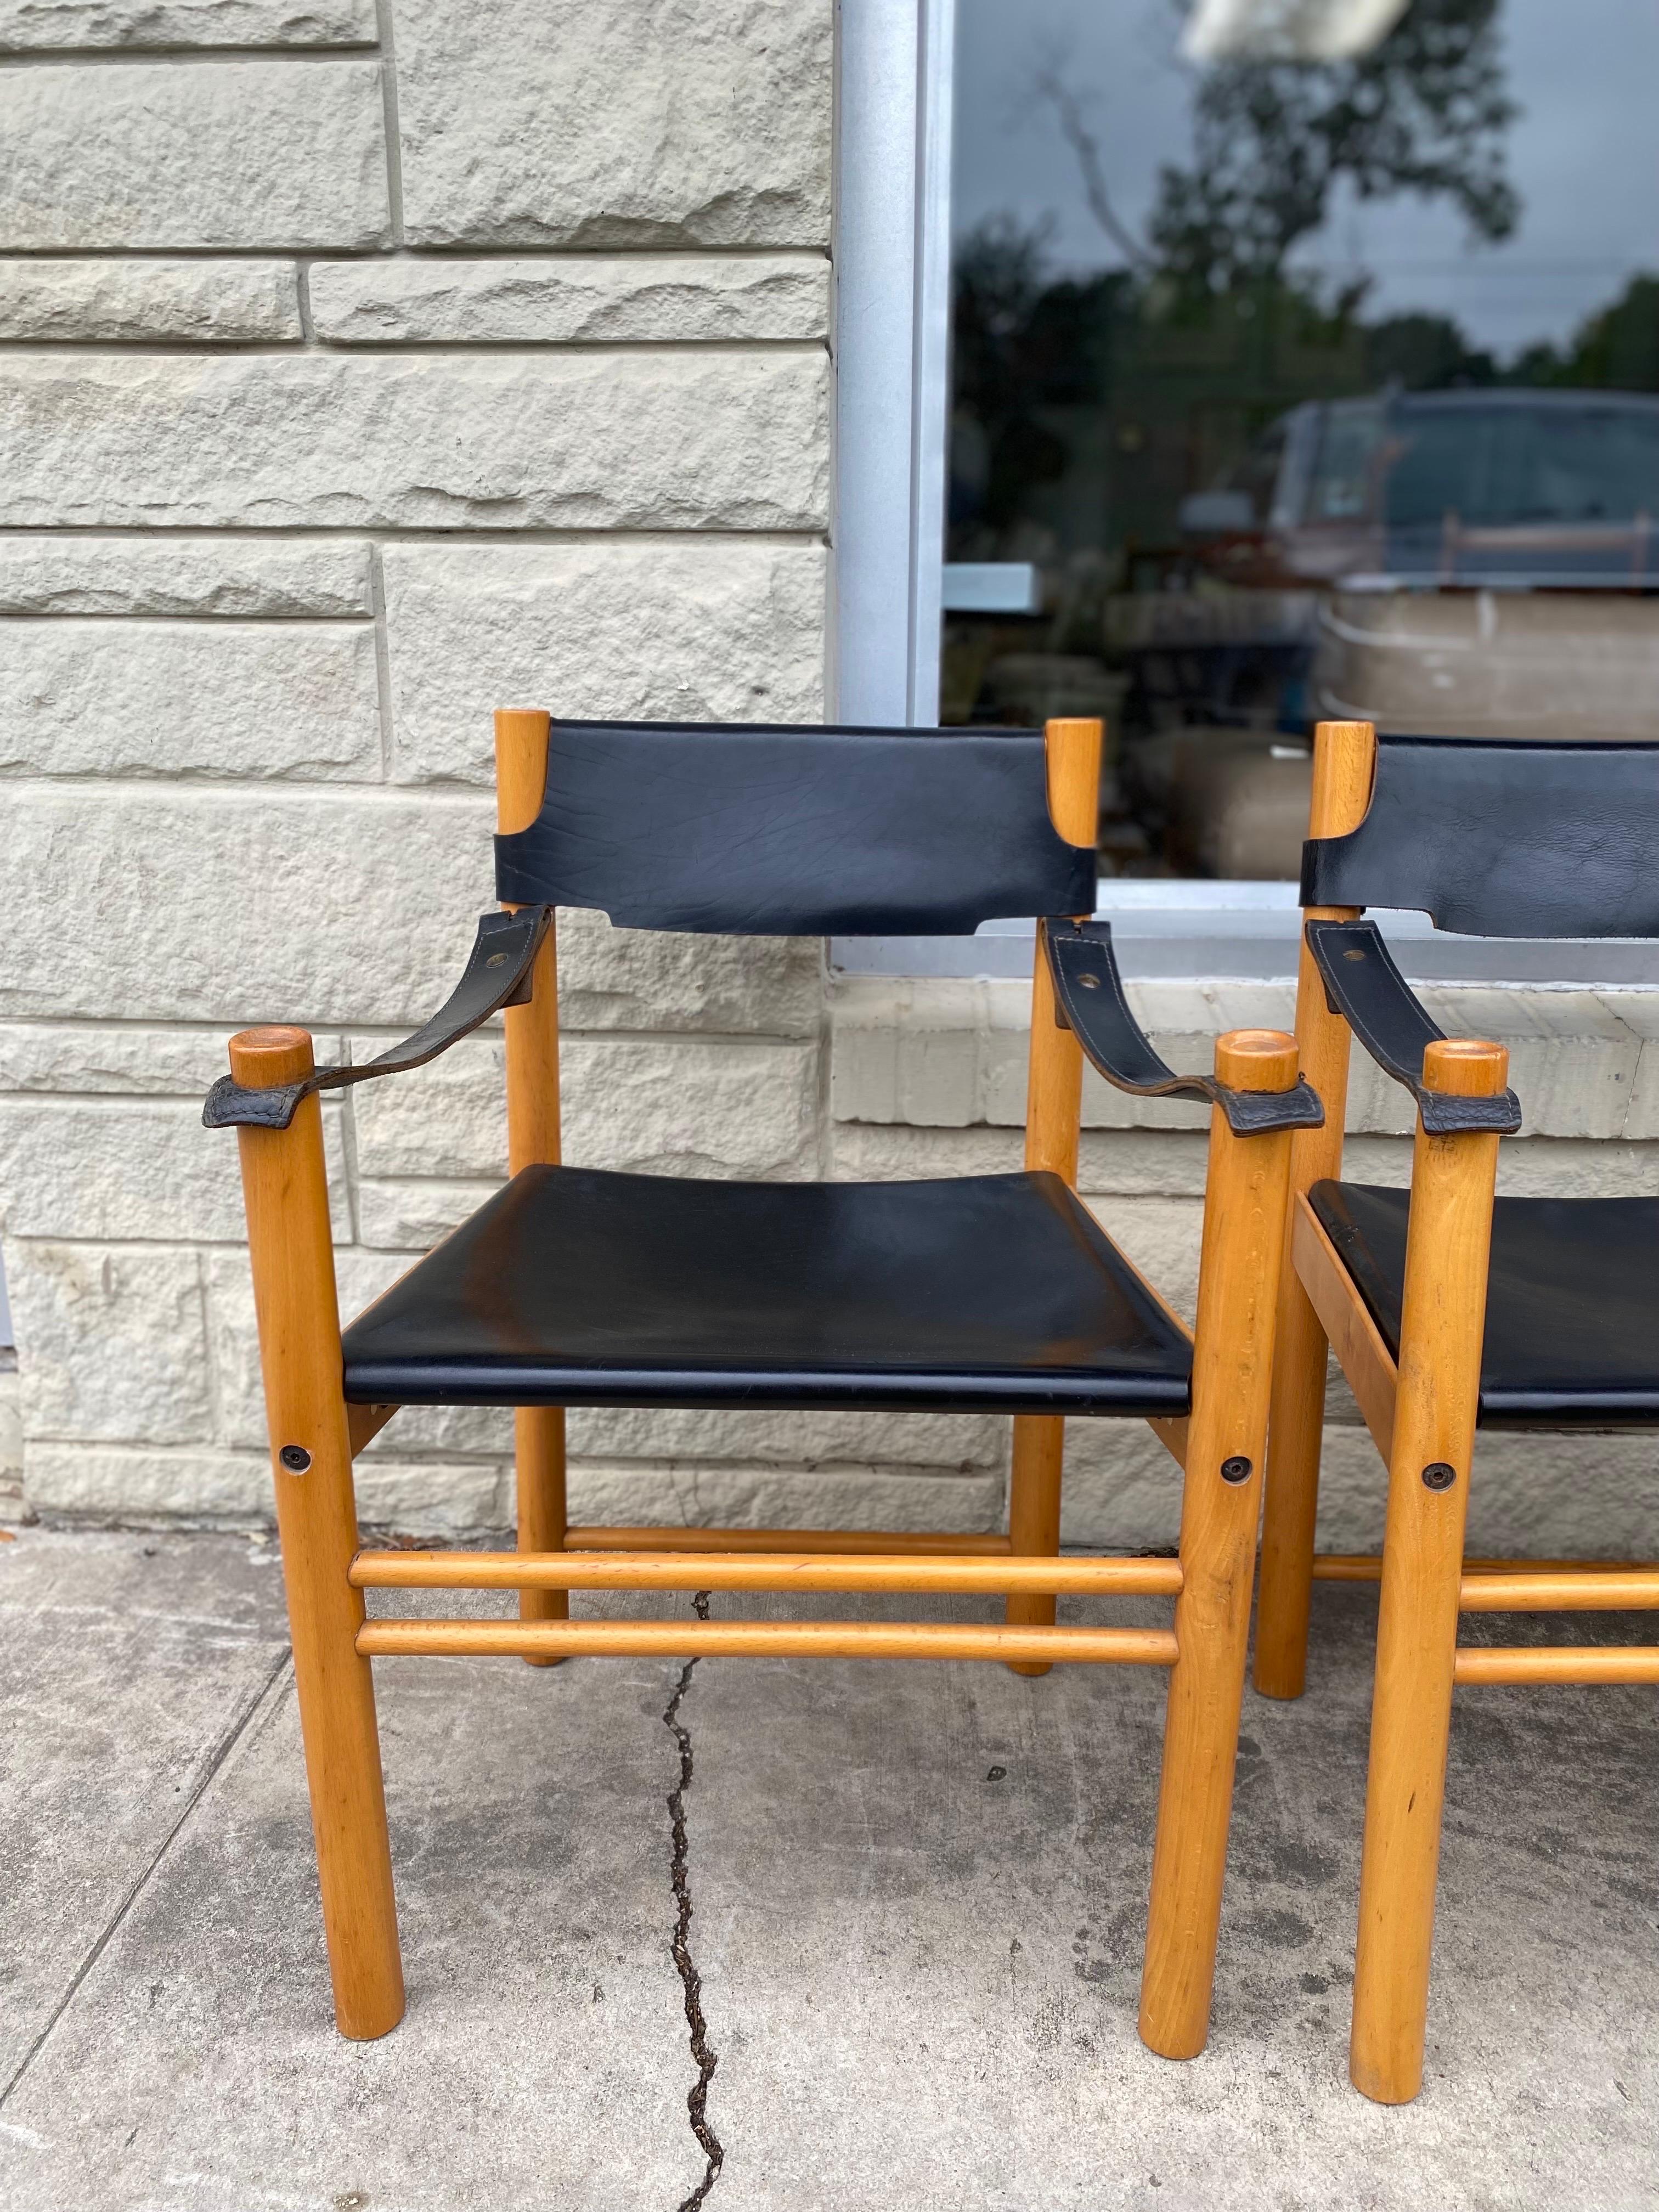 Set of 4 vintage Ibisco Sedie minimalistic armchairs feature beech wood frames with leather seating, arms, and backs, Italy, circa late 1960s. These vintage Italian safari style chairs are in good overall condition with light wear consistent with